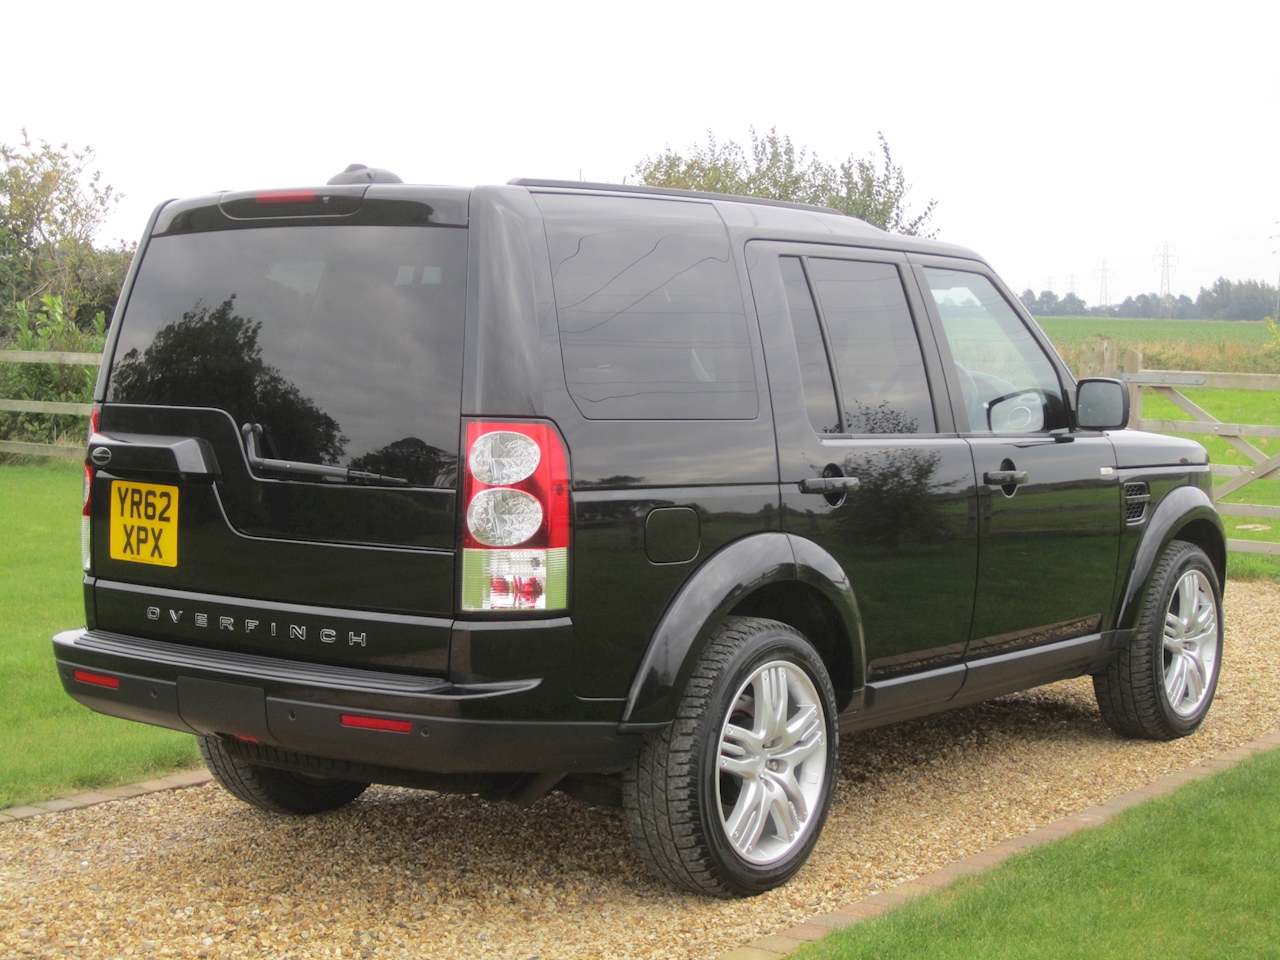 Discovery Sdv6 Hse Estate 3.0 Automatic Diesel